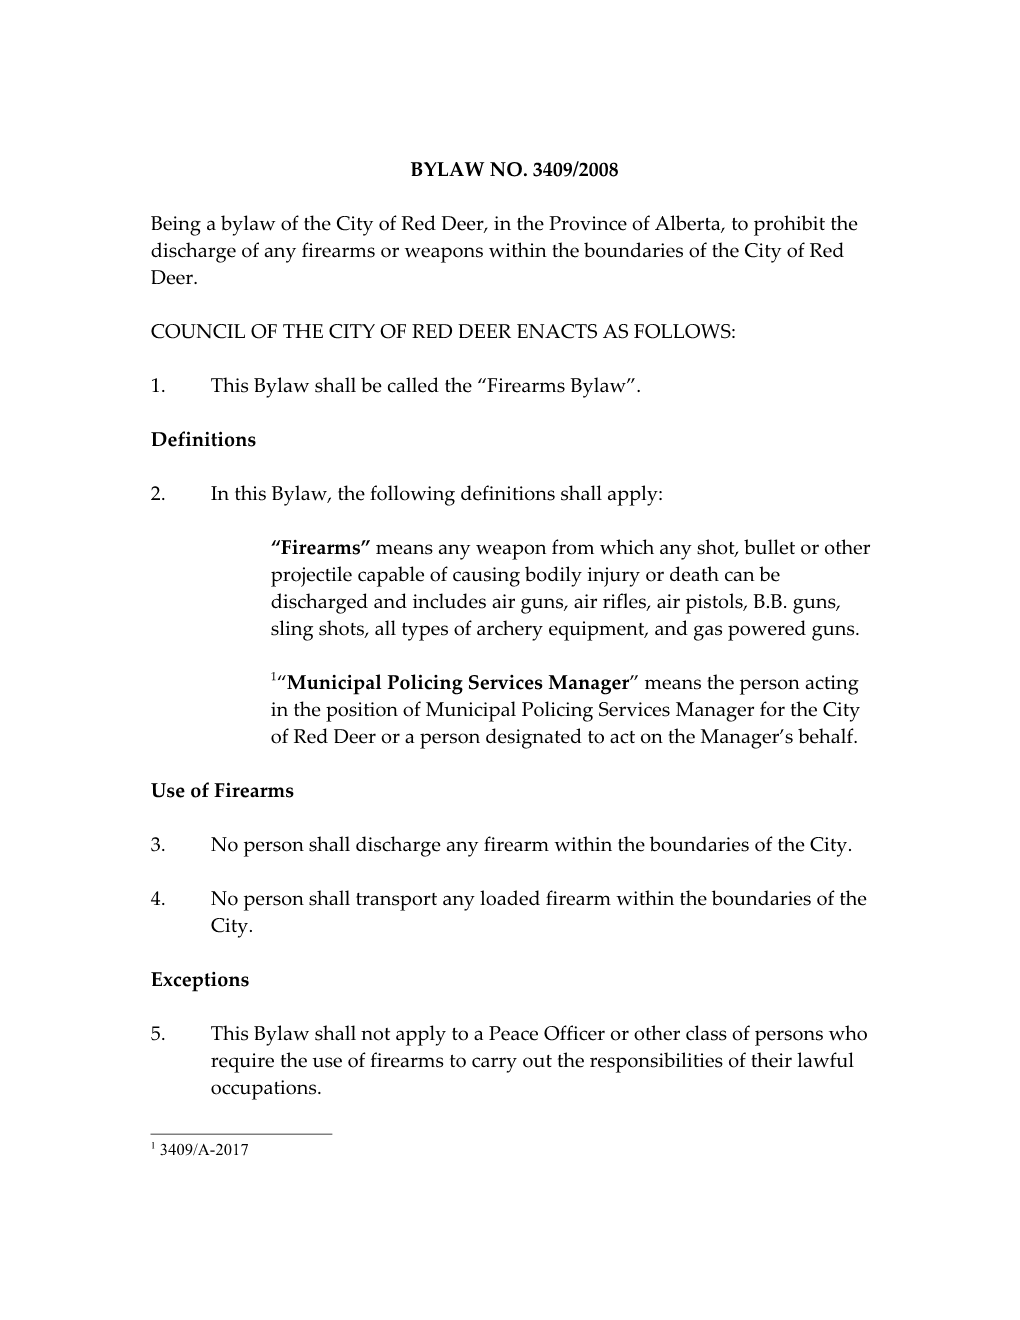 Council of the City of Red Deer Enacts As Follows